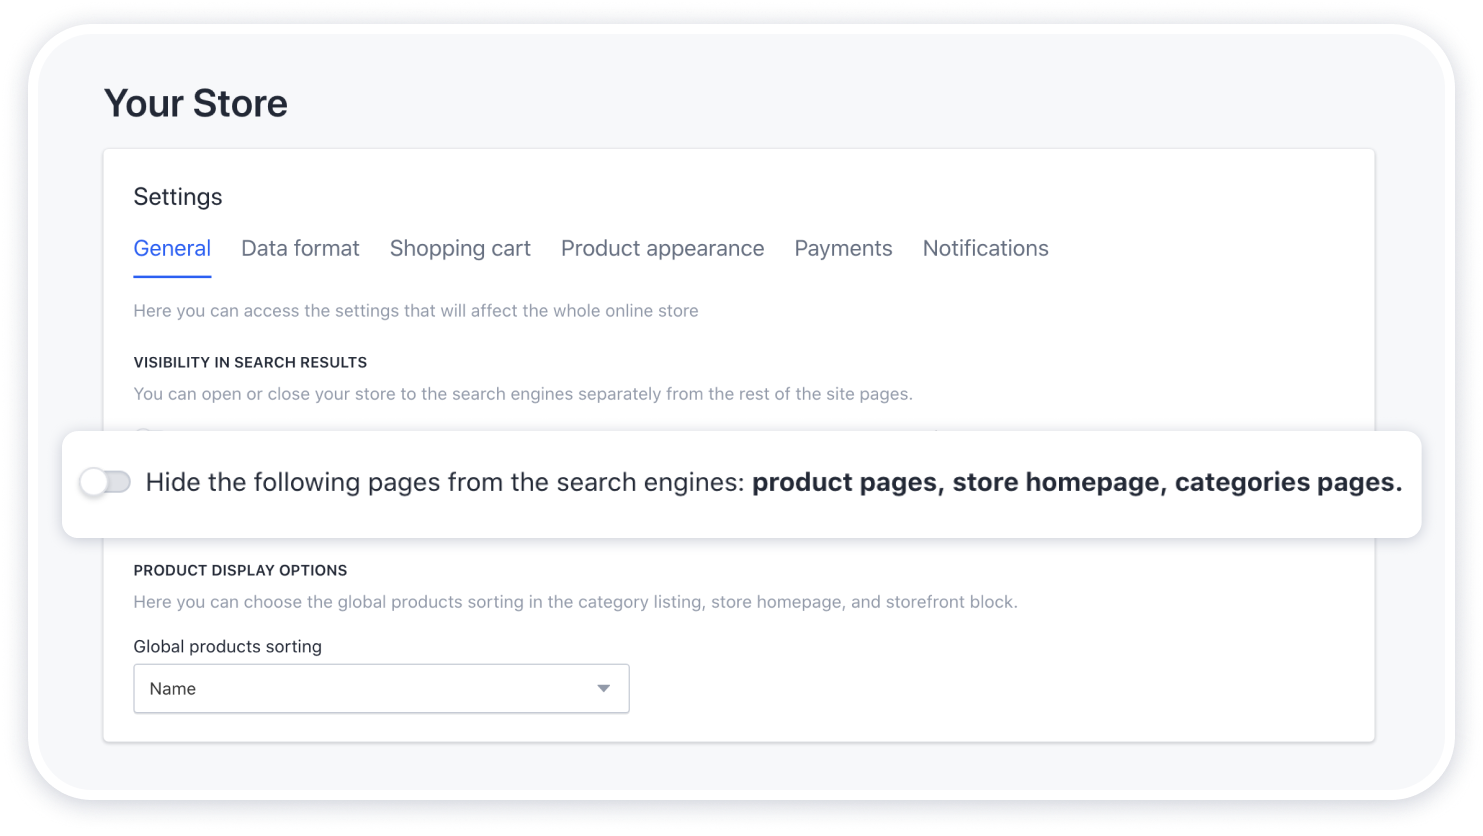 Setting store visibility in the search results